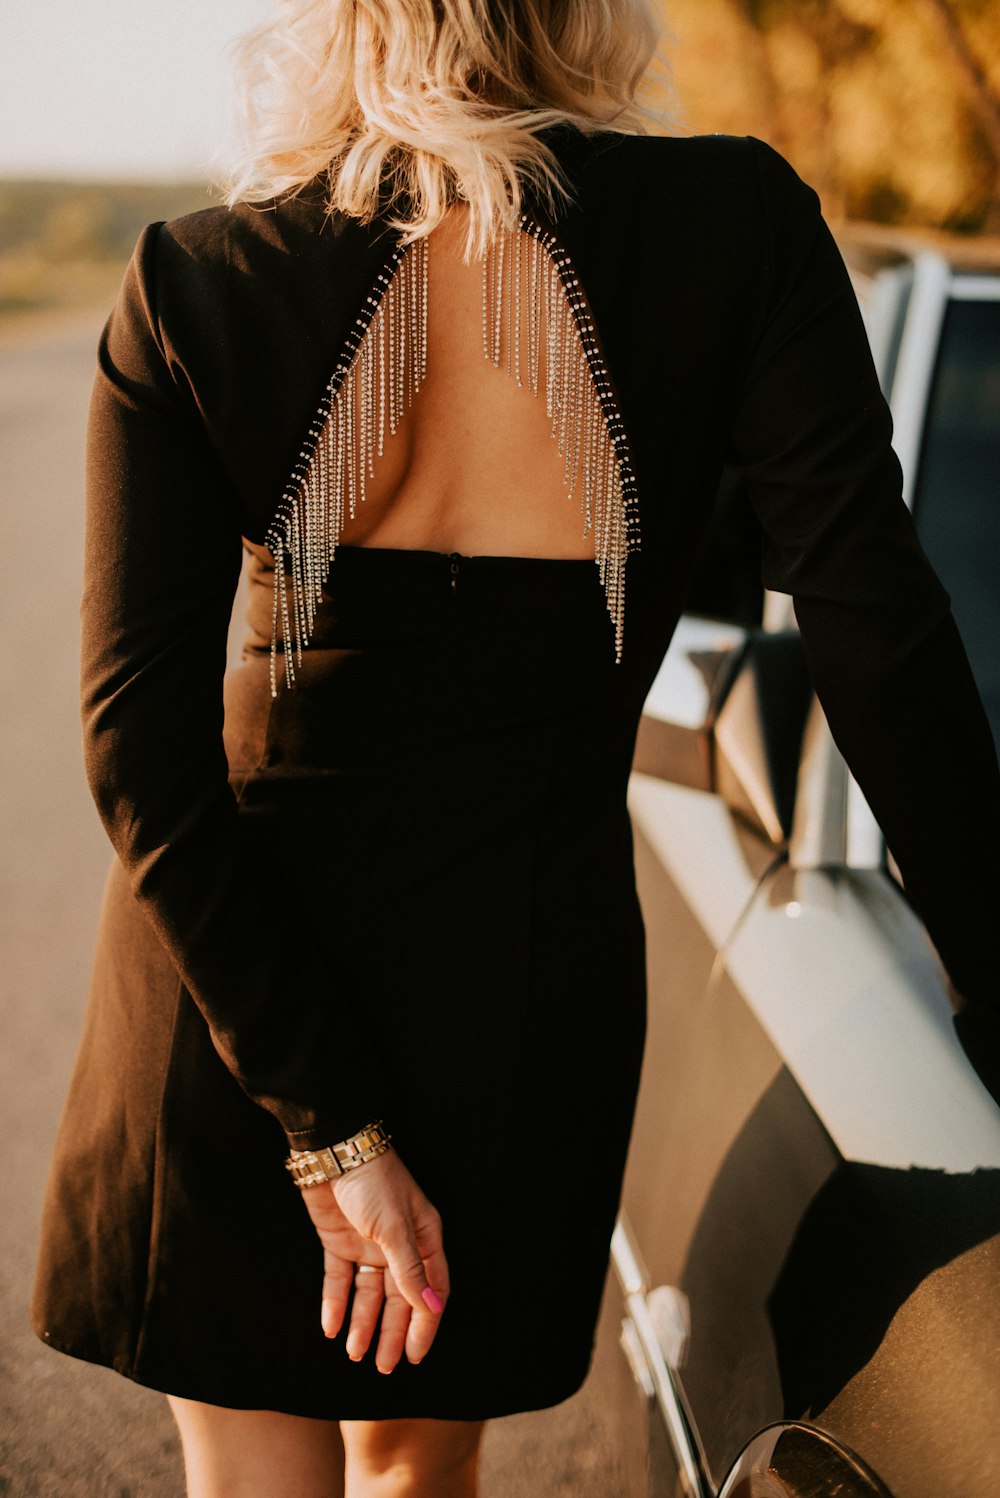 the back of a woman's black dress with fringe detailing